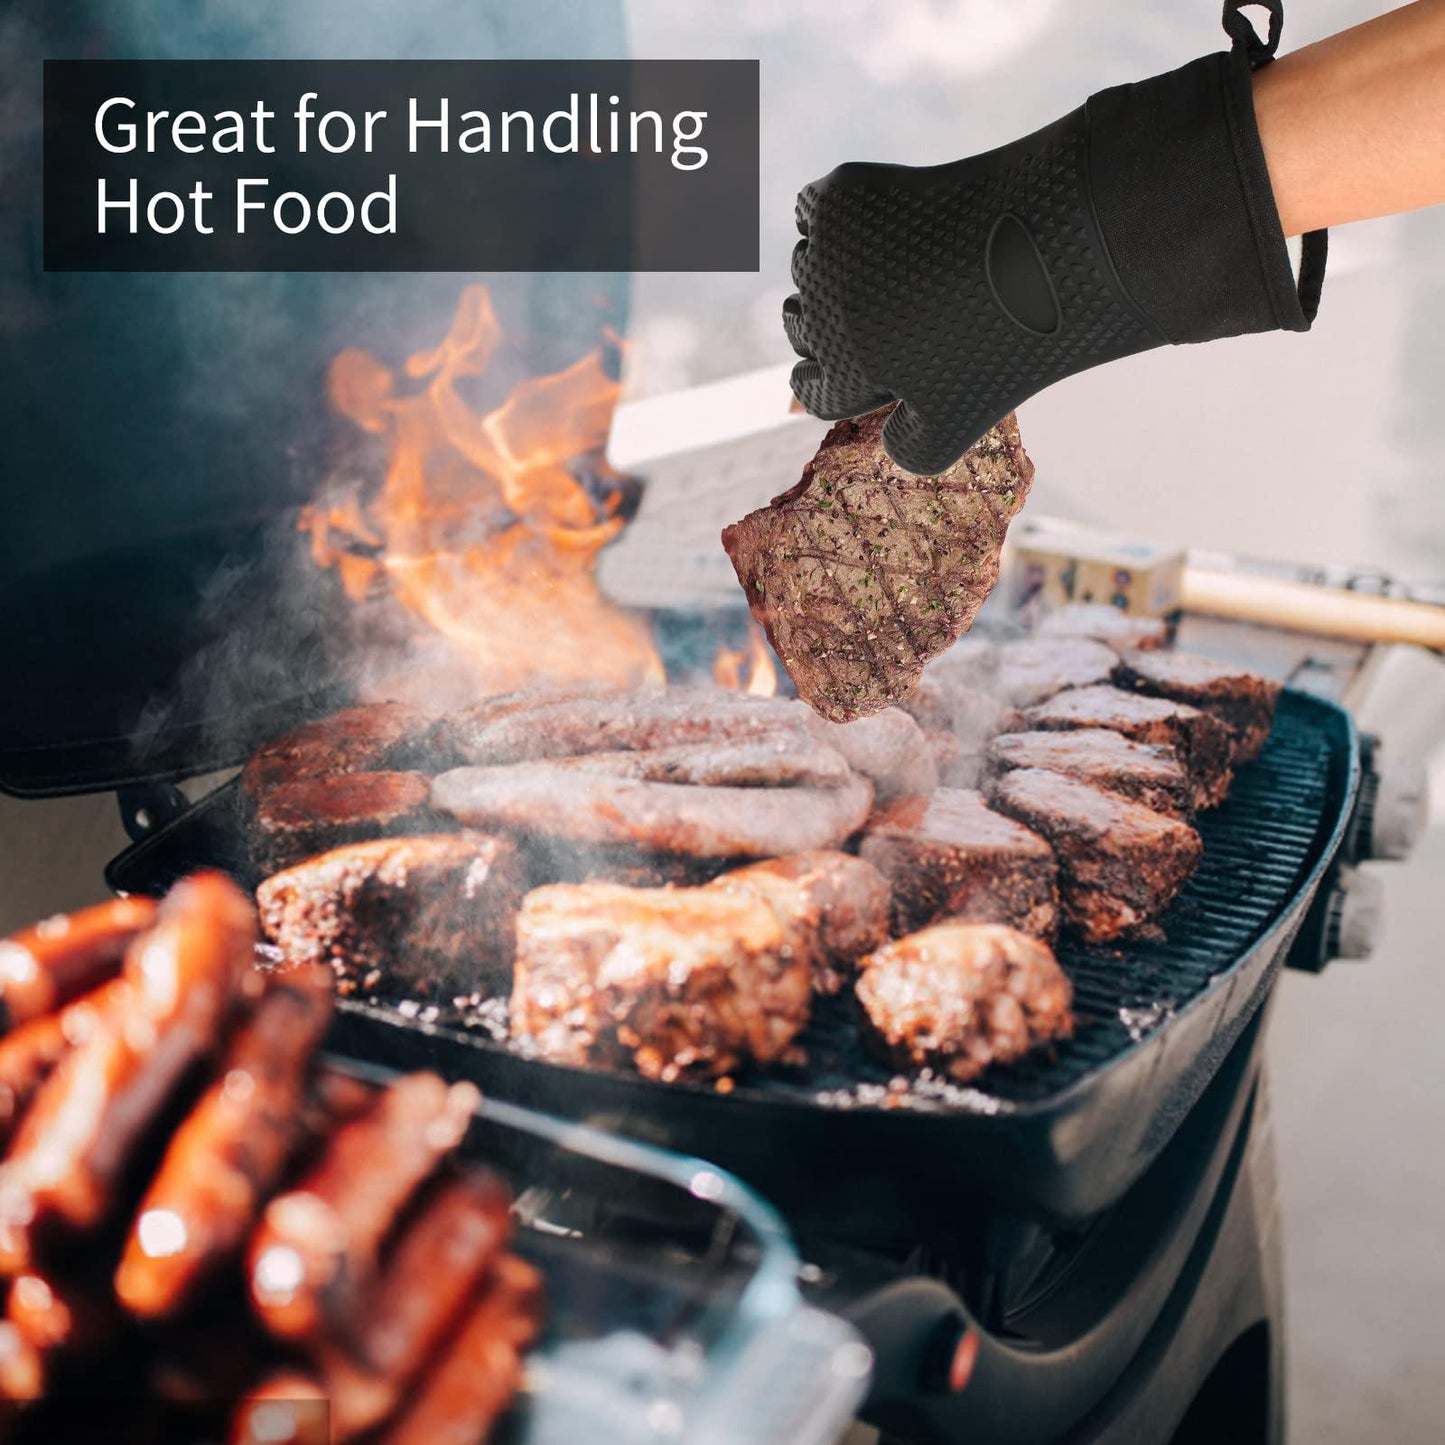 Waterproof BBQ Grill Oven Gloves Heat Resistant,Extra Long,Soft Quilted Lining, Silicone Gloves for Grilling Smoking Barbecue-Great for Handling Hot Food on Your Grill Fryer and Pit,Easy Clean,1 Pair - CookCave